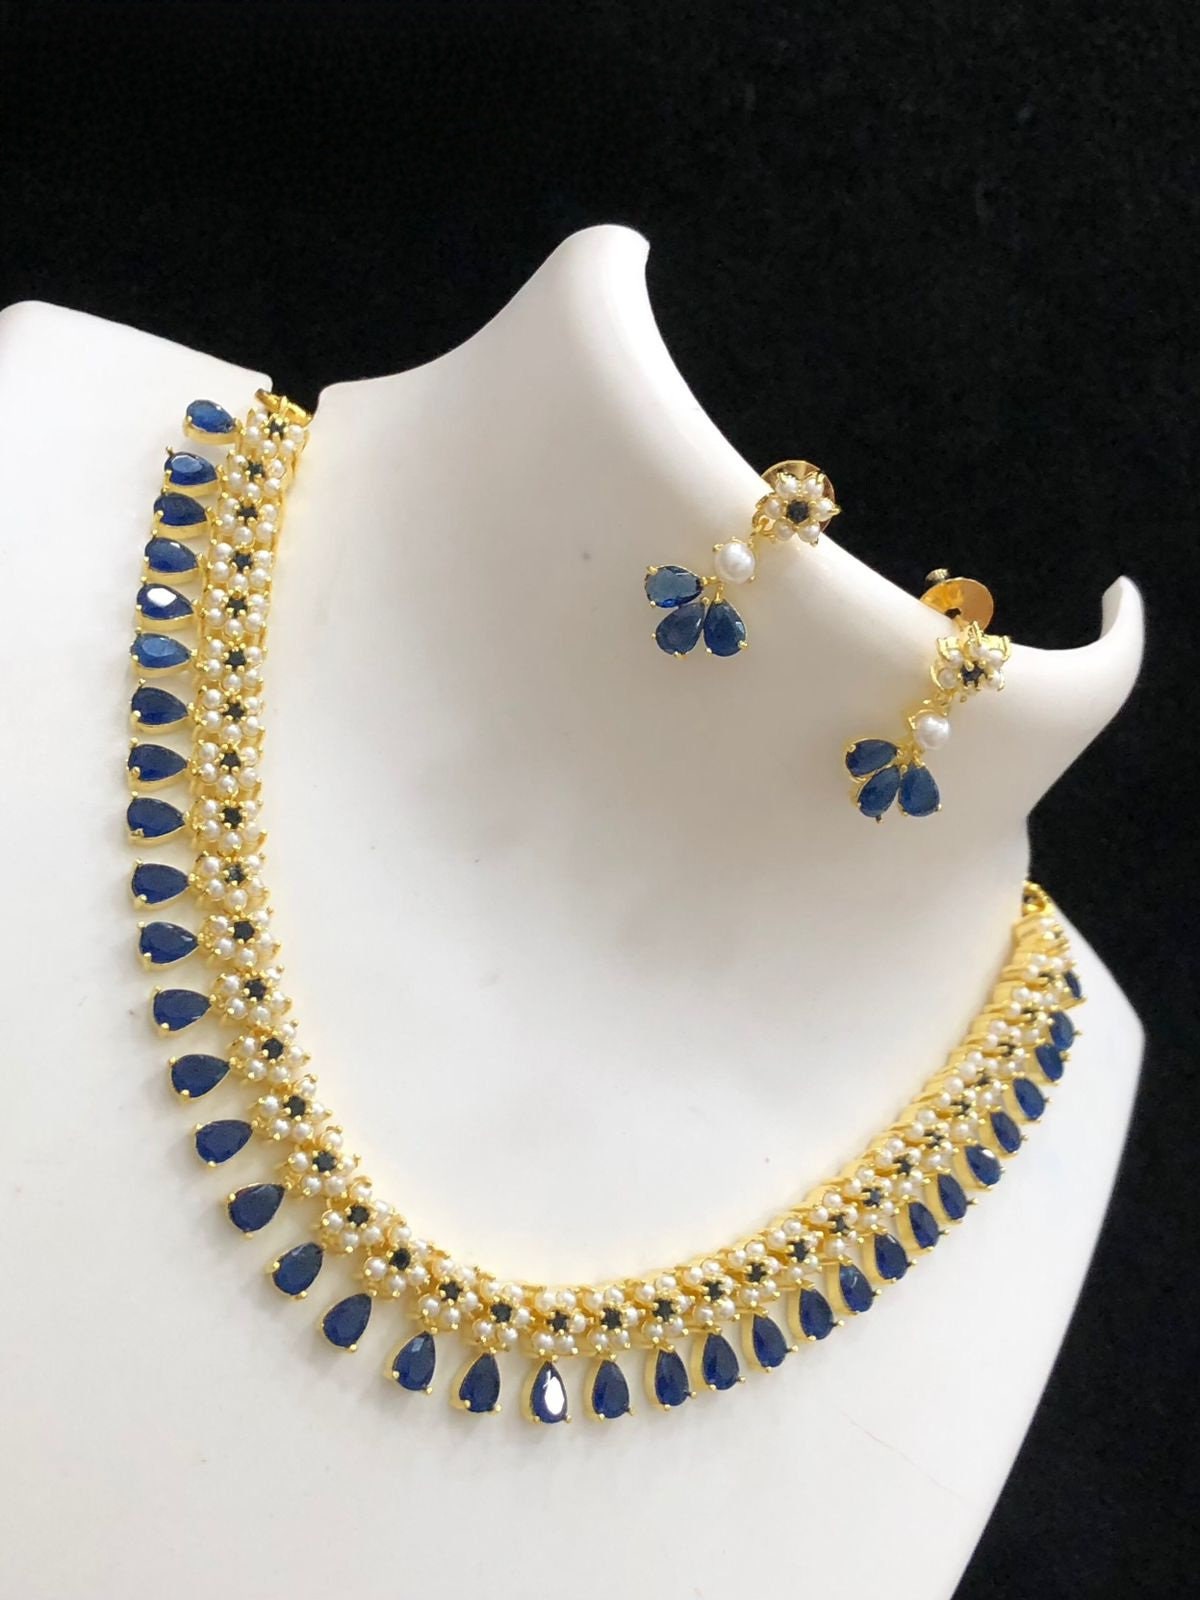 Pearl and Cz American Diamond Necklace | Indian Jewelry | Pearl and pear floral design necklace earring set